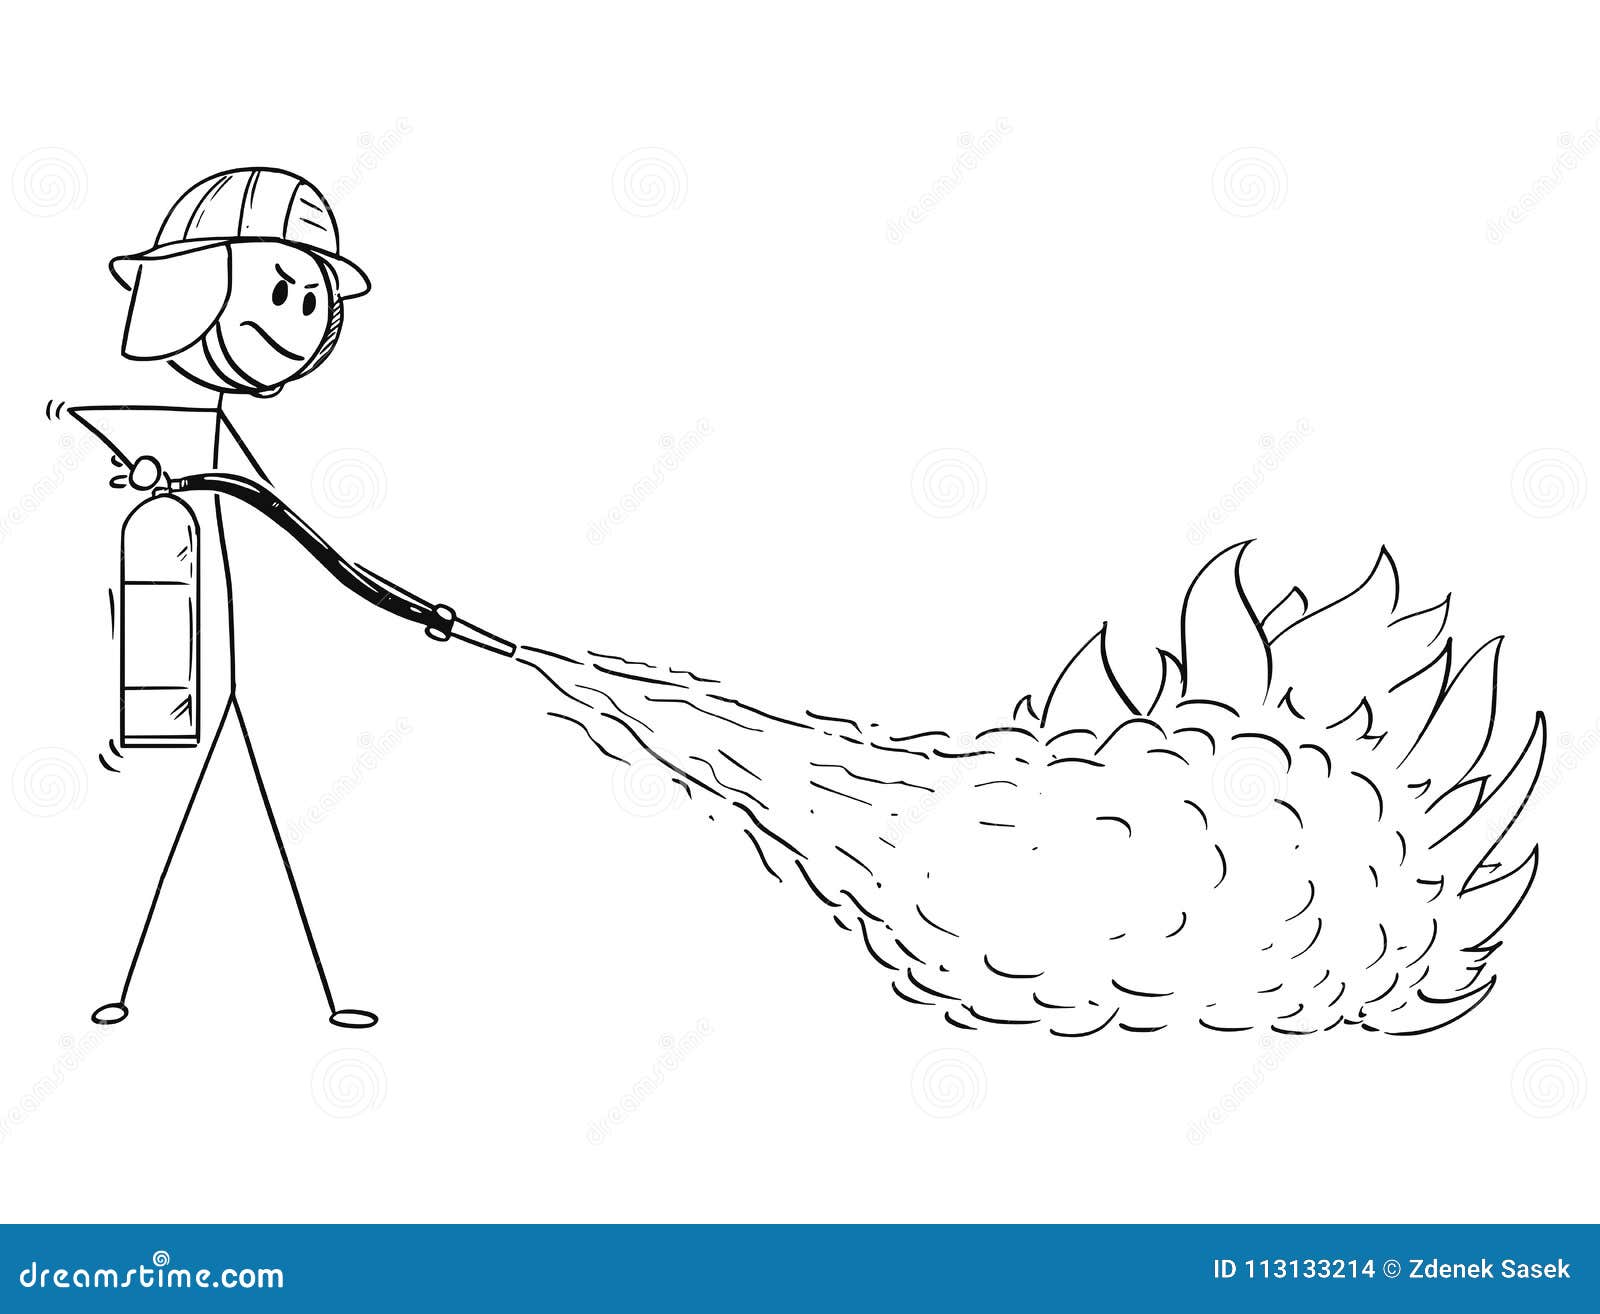 Cartoon of Firefighter Using Extinguisher To Fight the Fire Stock Vector -  Illustration of profession, help: 113133214